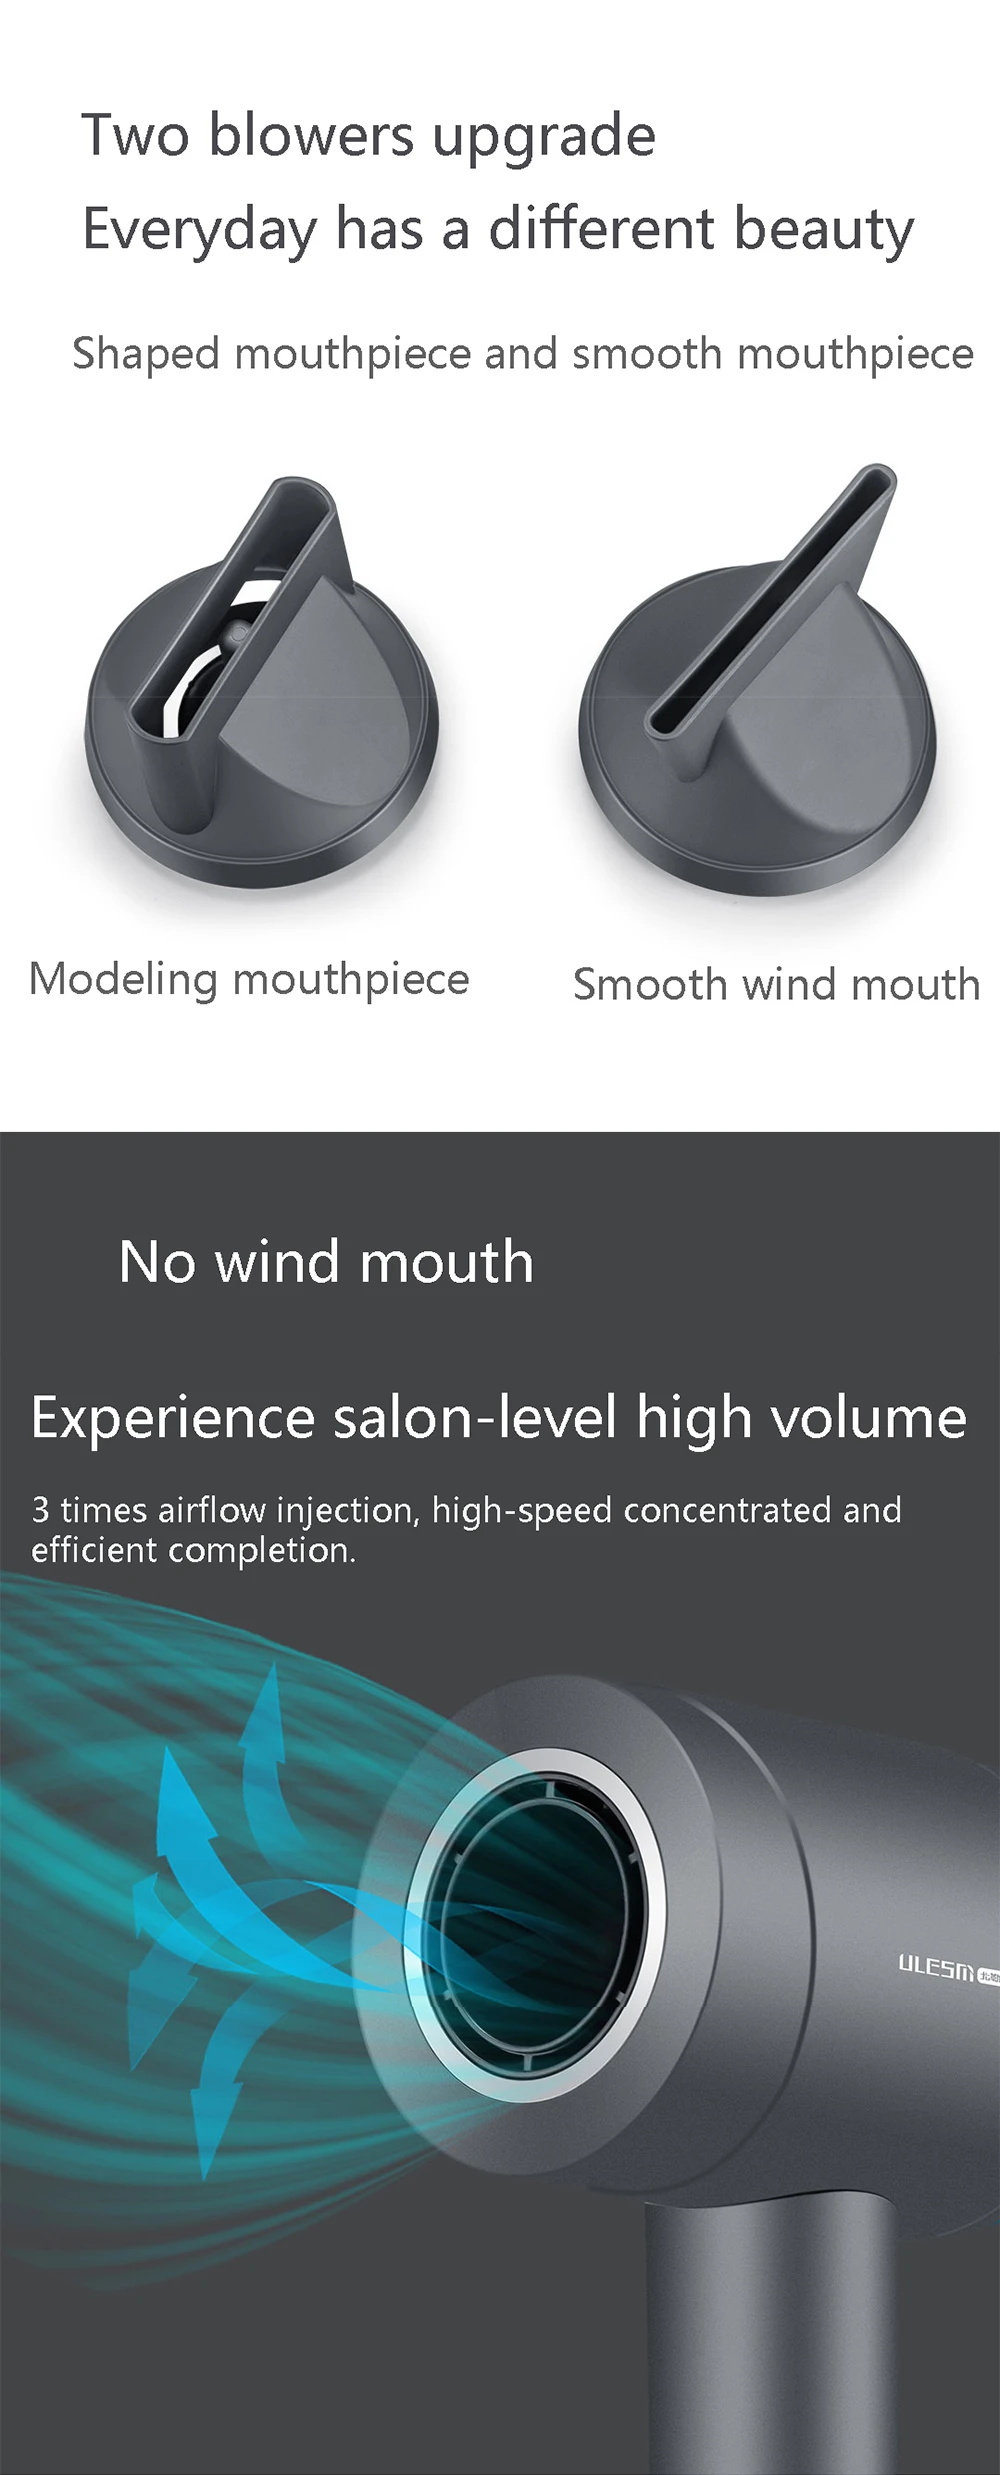 Mobile2Go. Xiaomi YouPin ULESM Hair Dryer